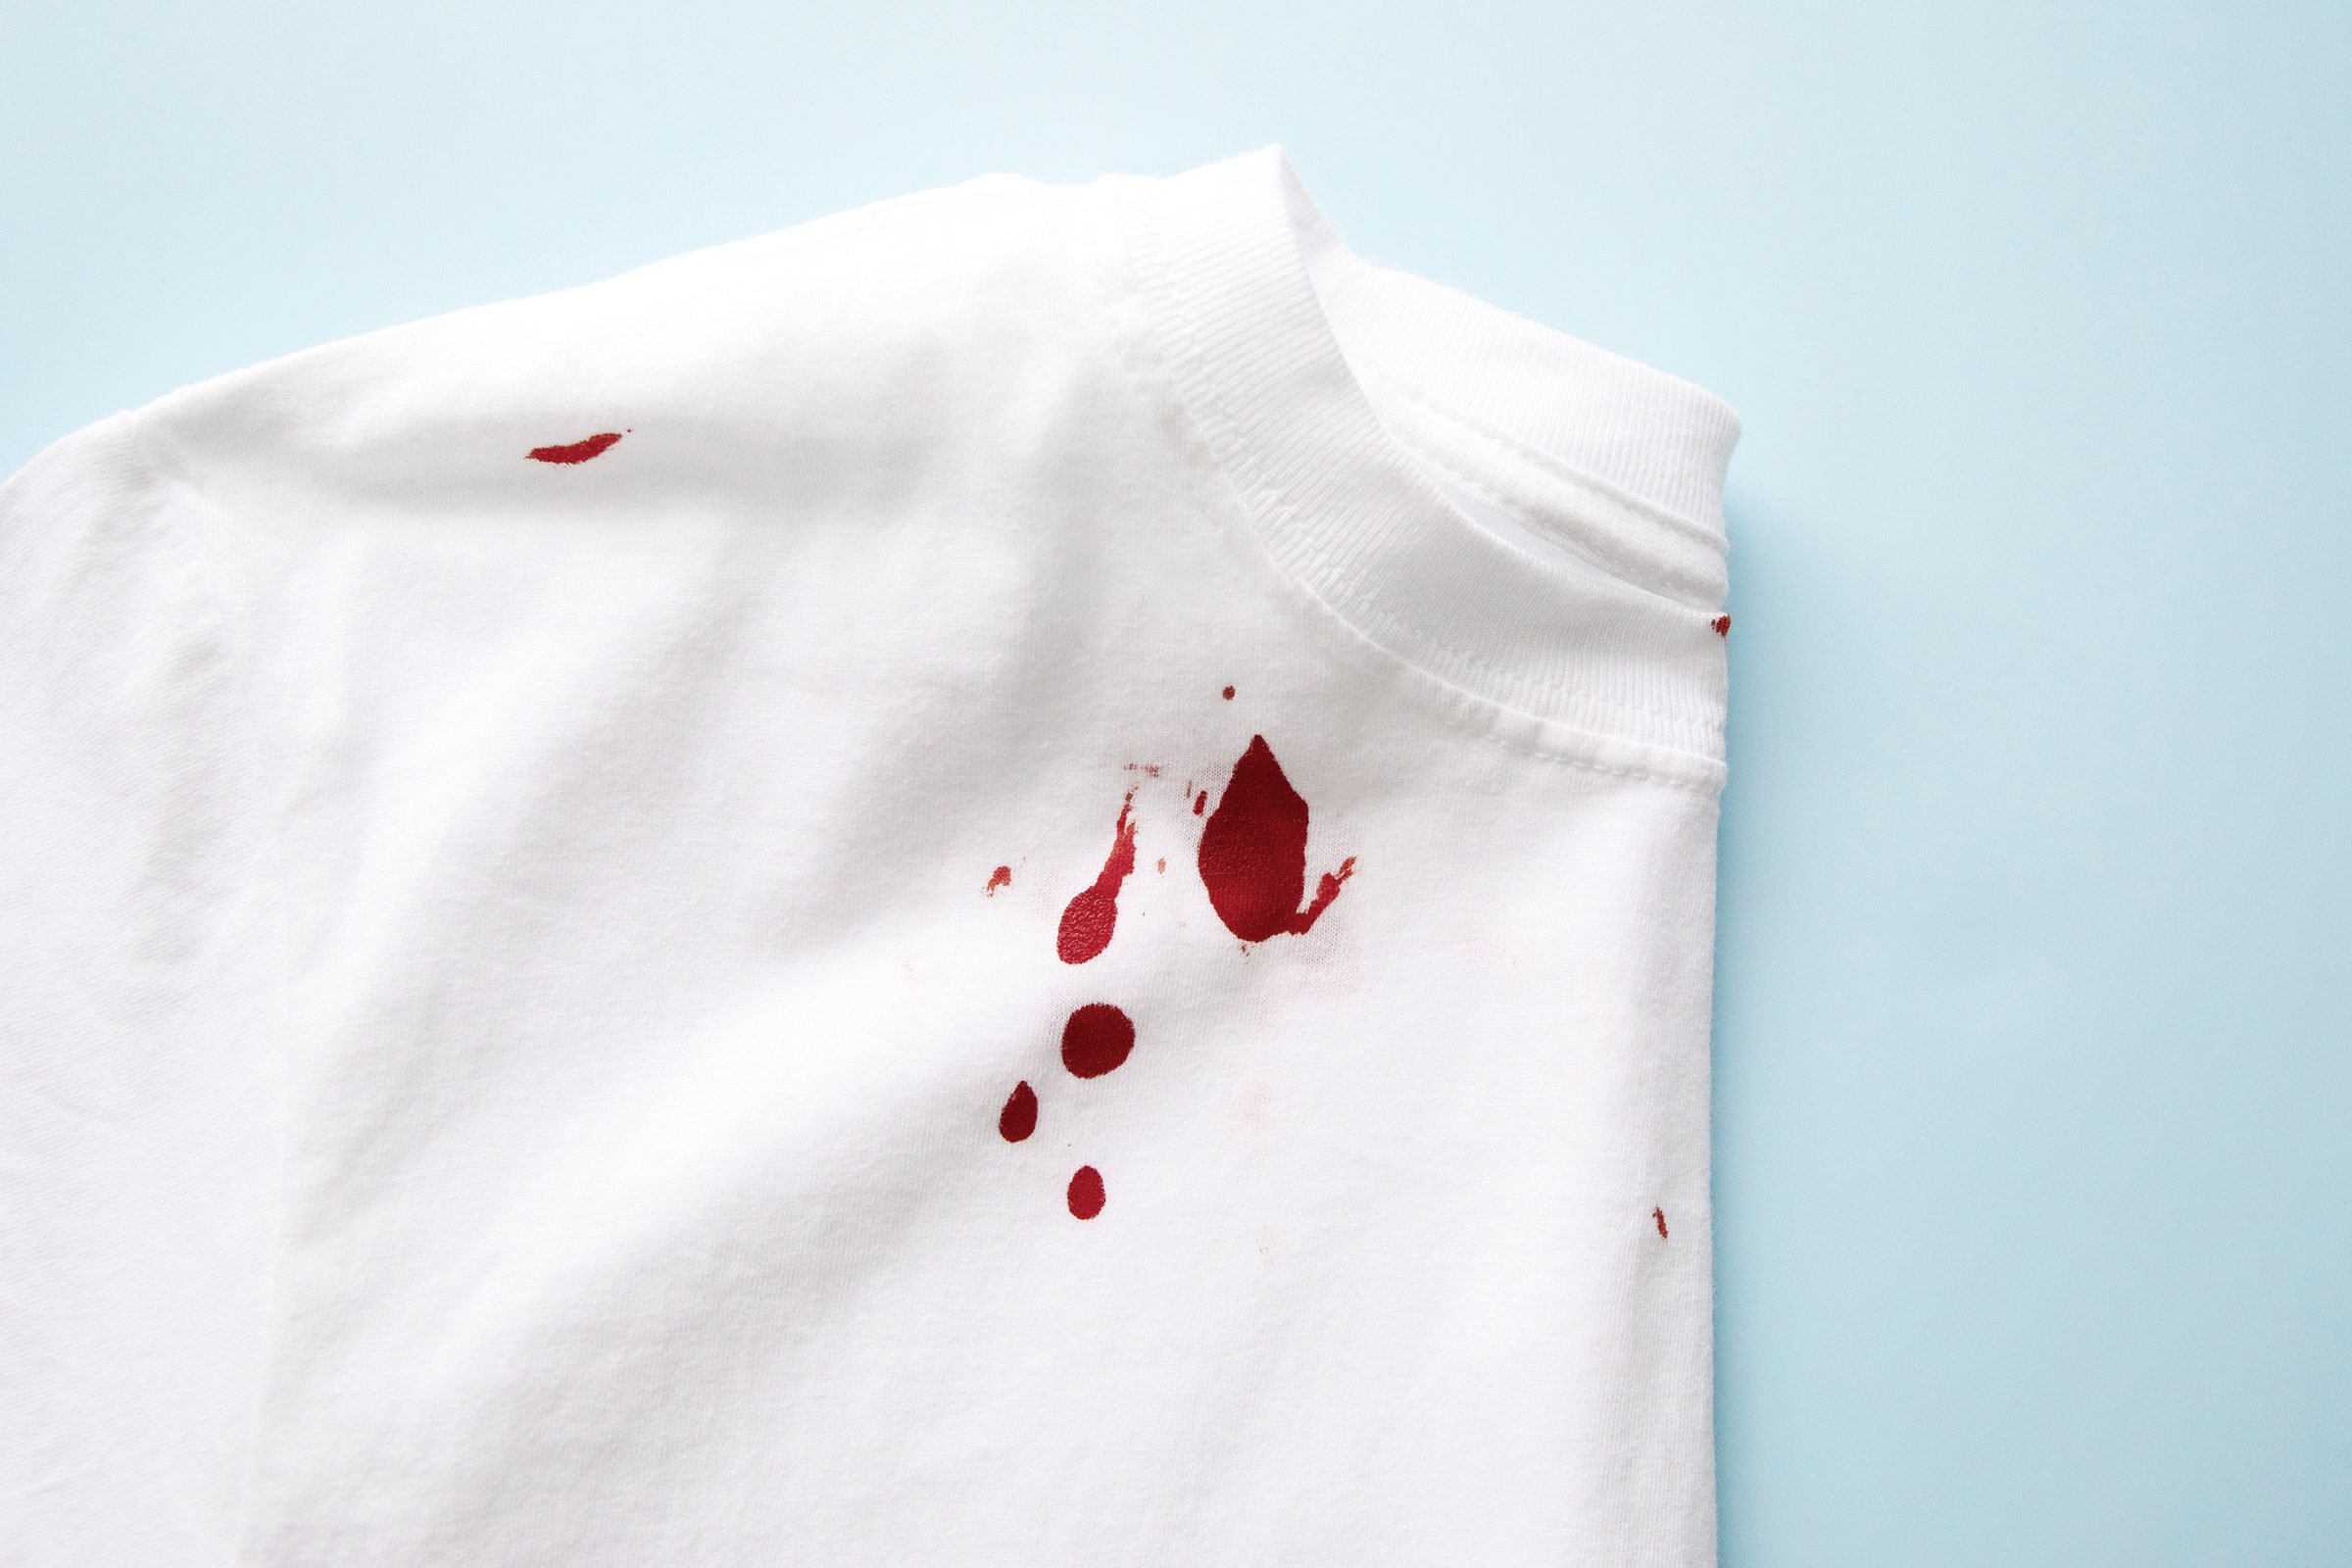 How to remove blood stains from jeans